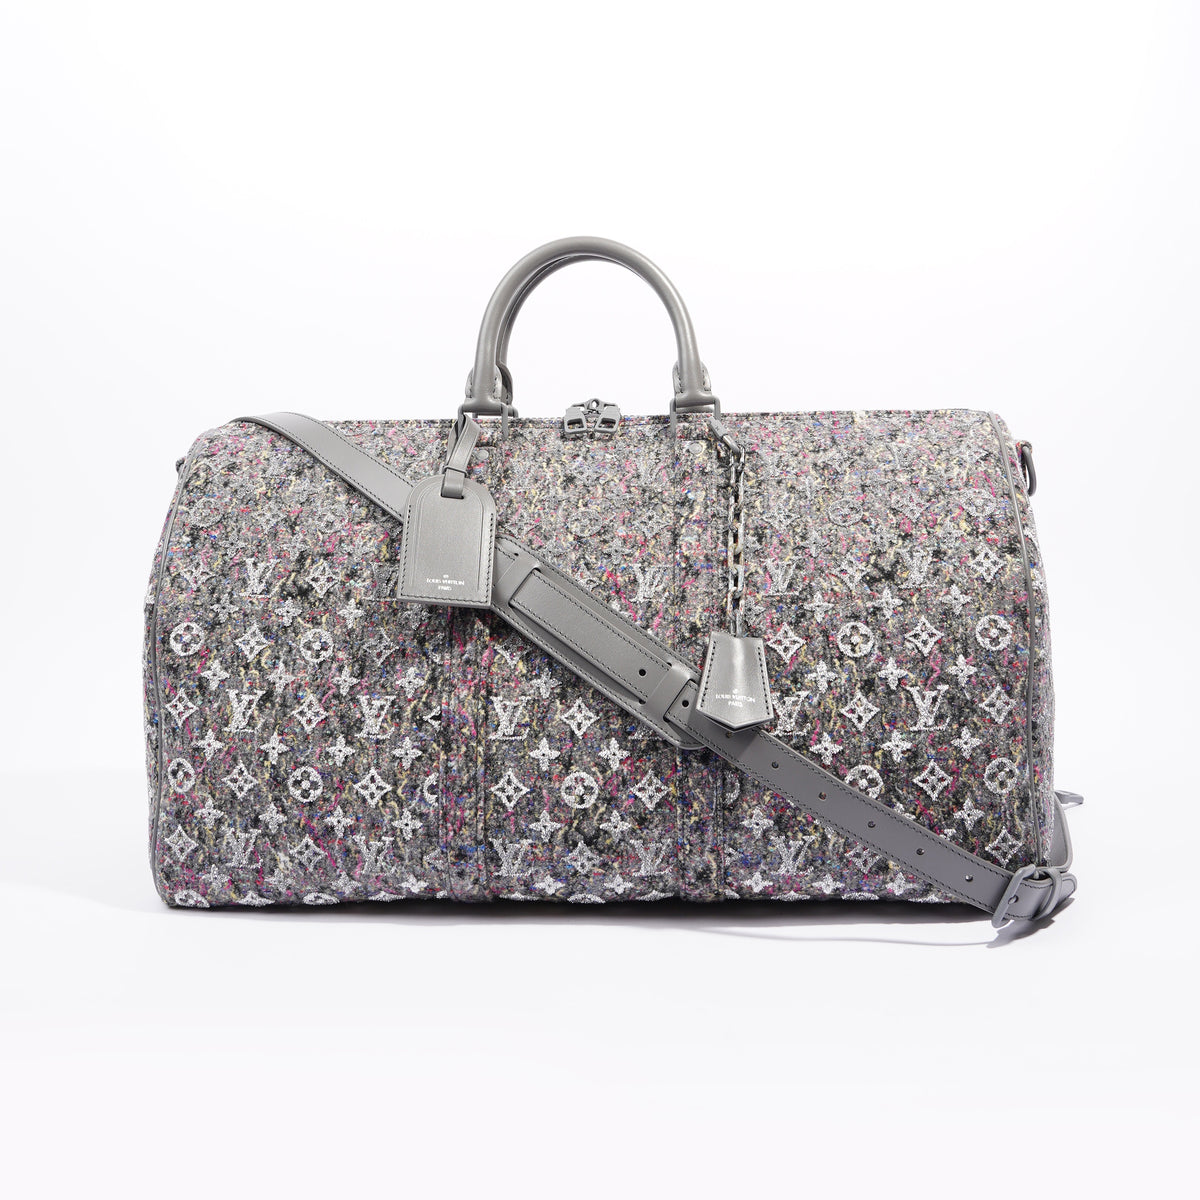 LOUIS VUITTON Keepall Bandouliere 45 My LV Heritage 2WAY Travel